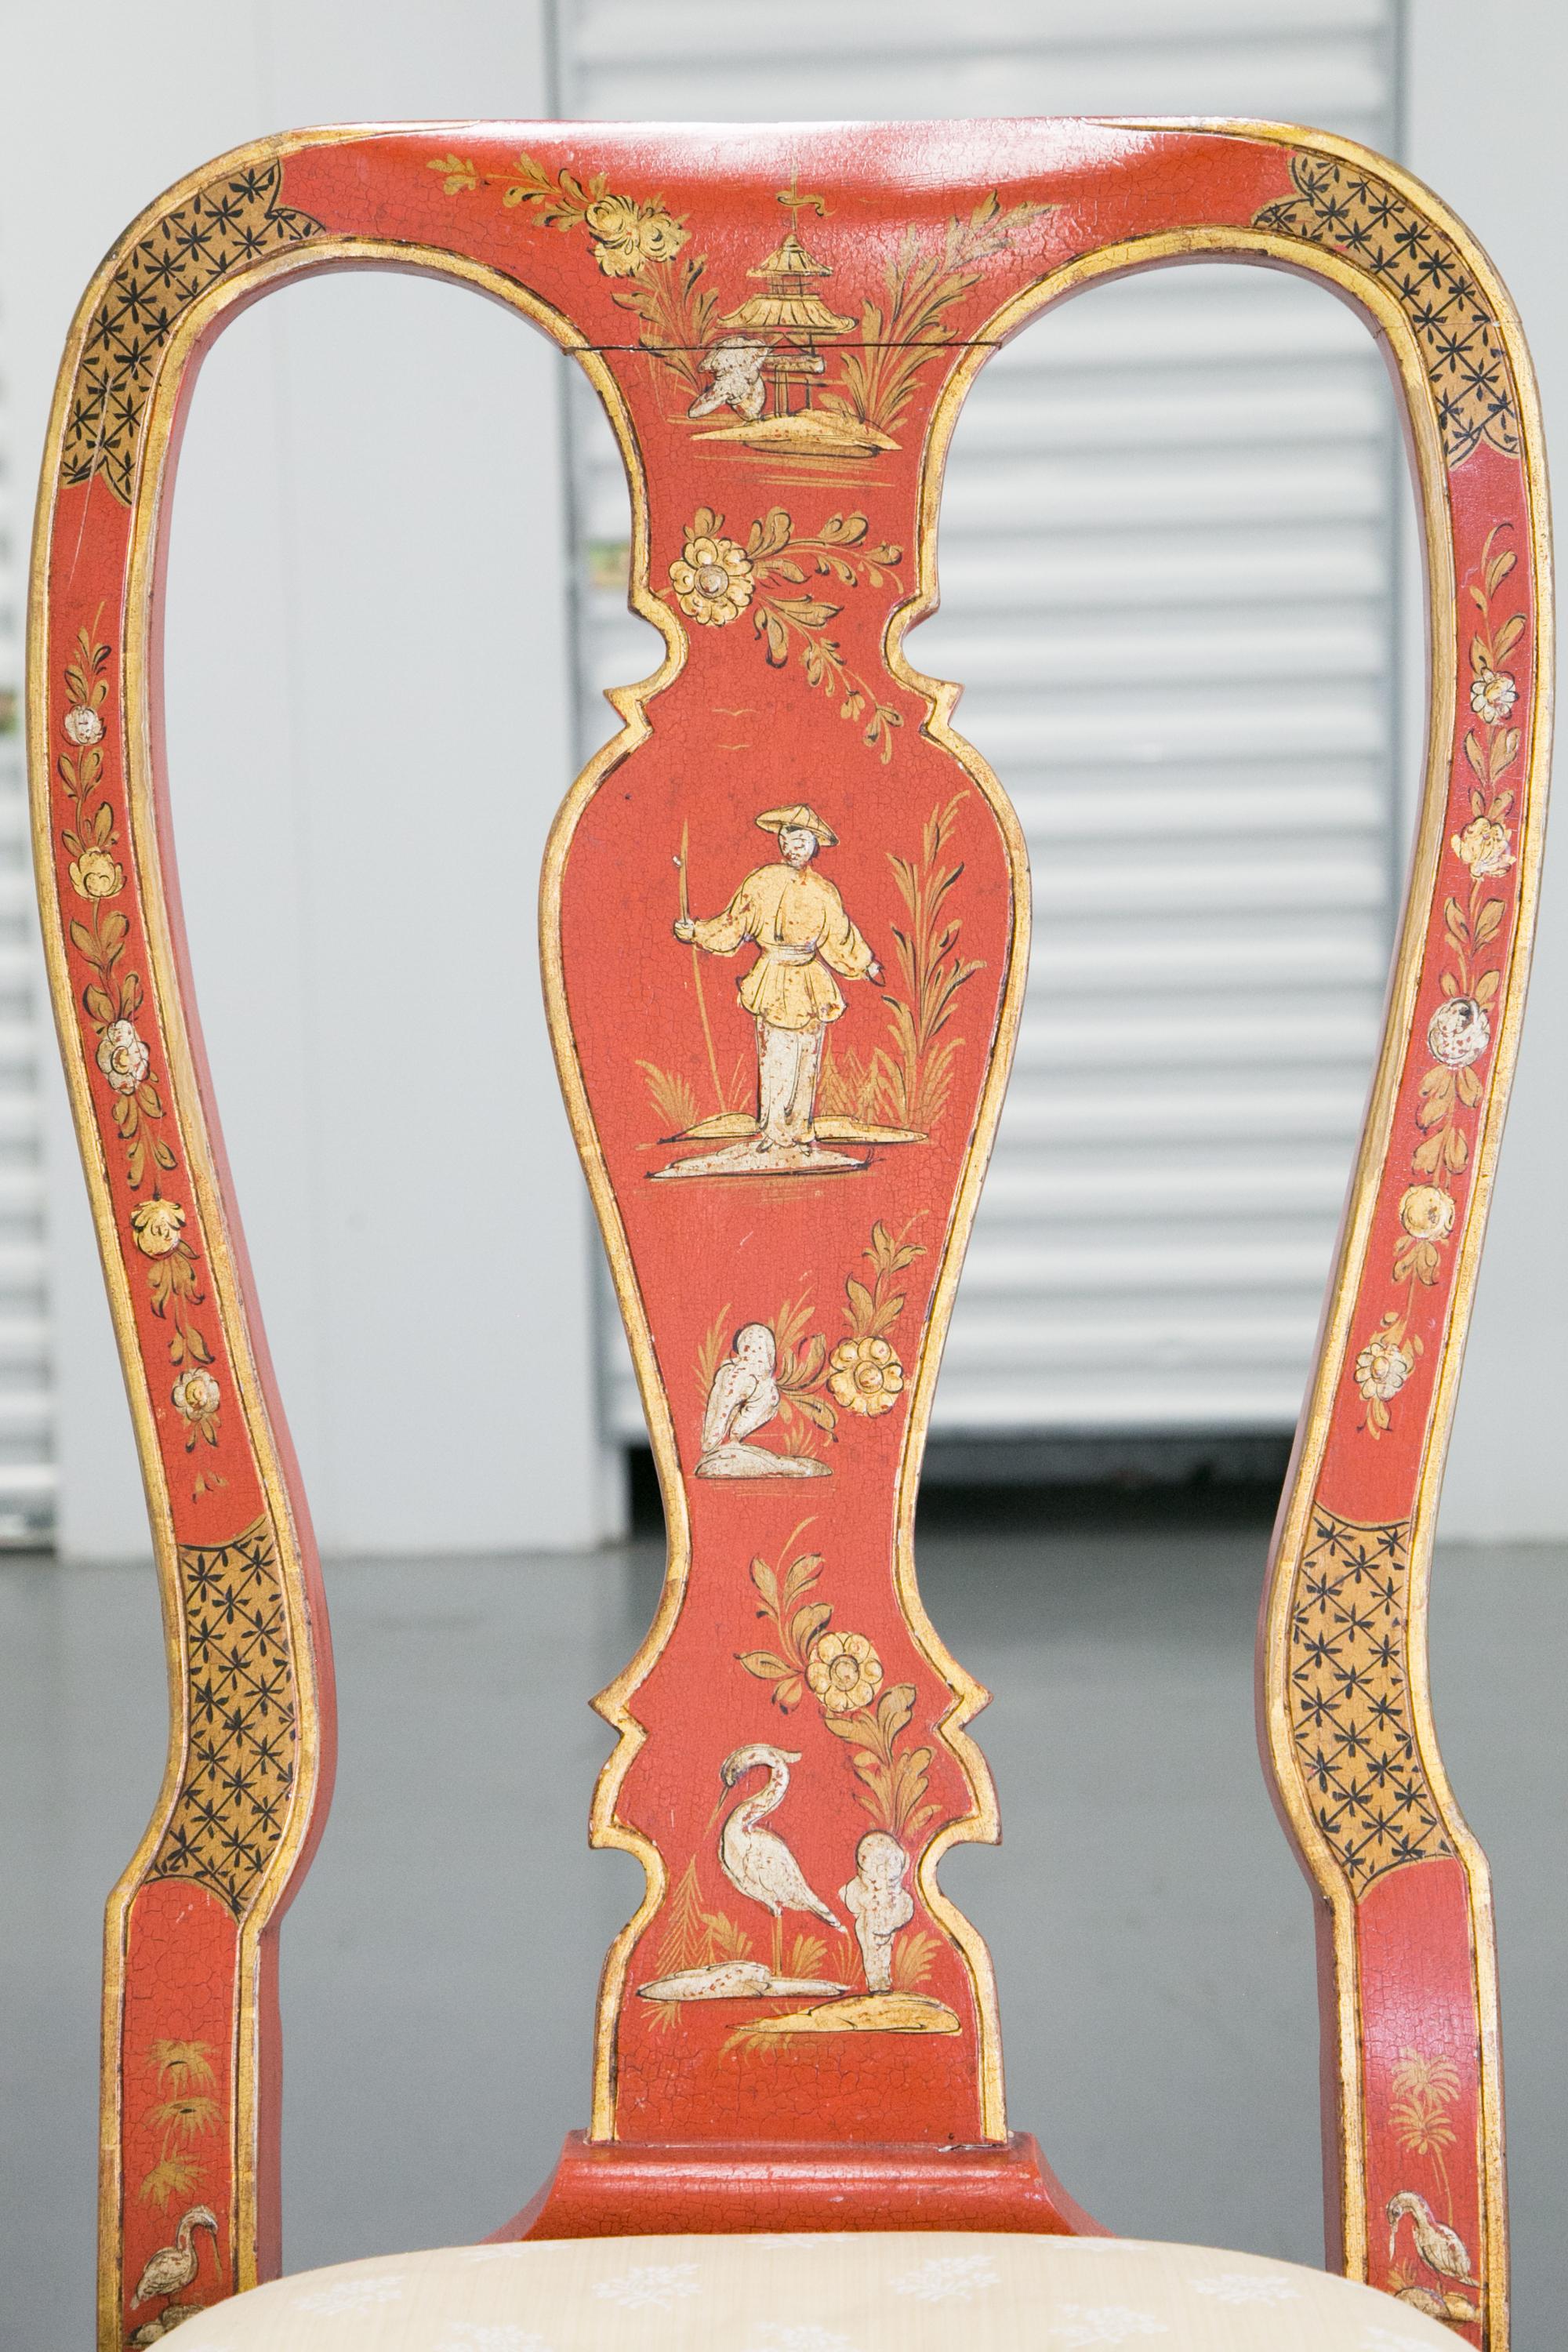 This is a Classic pair of chinoiserie or 'japanned' carved and upholstered side chairs painted overall in a Chinese red with raised figures of villagers and scenic views. The lacquered finish is highlighted with gilt decoration. The chairs are a